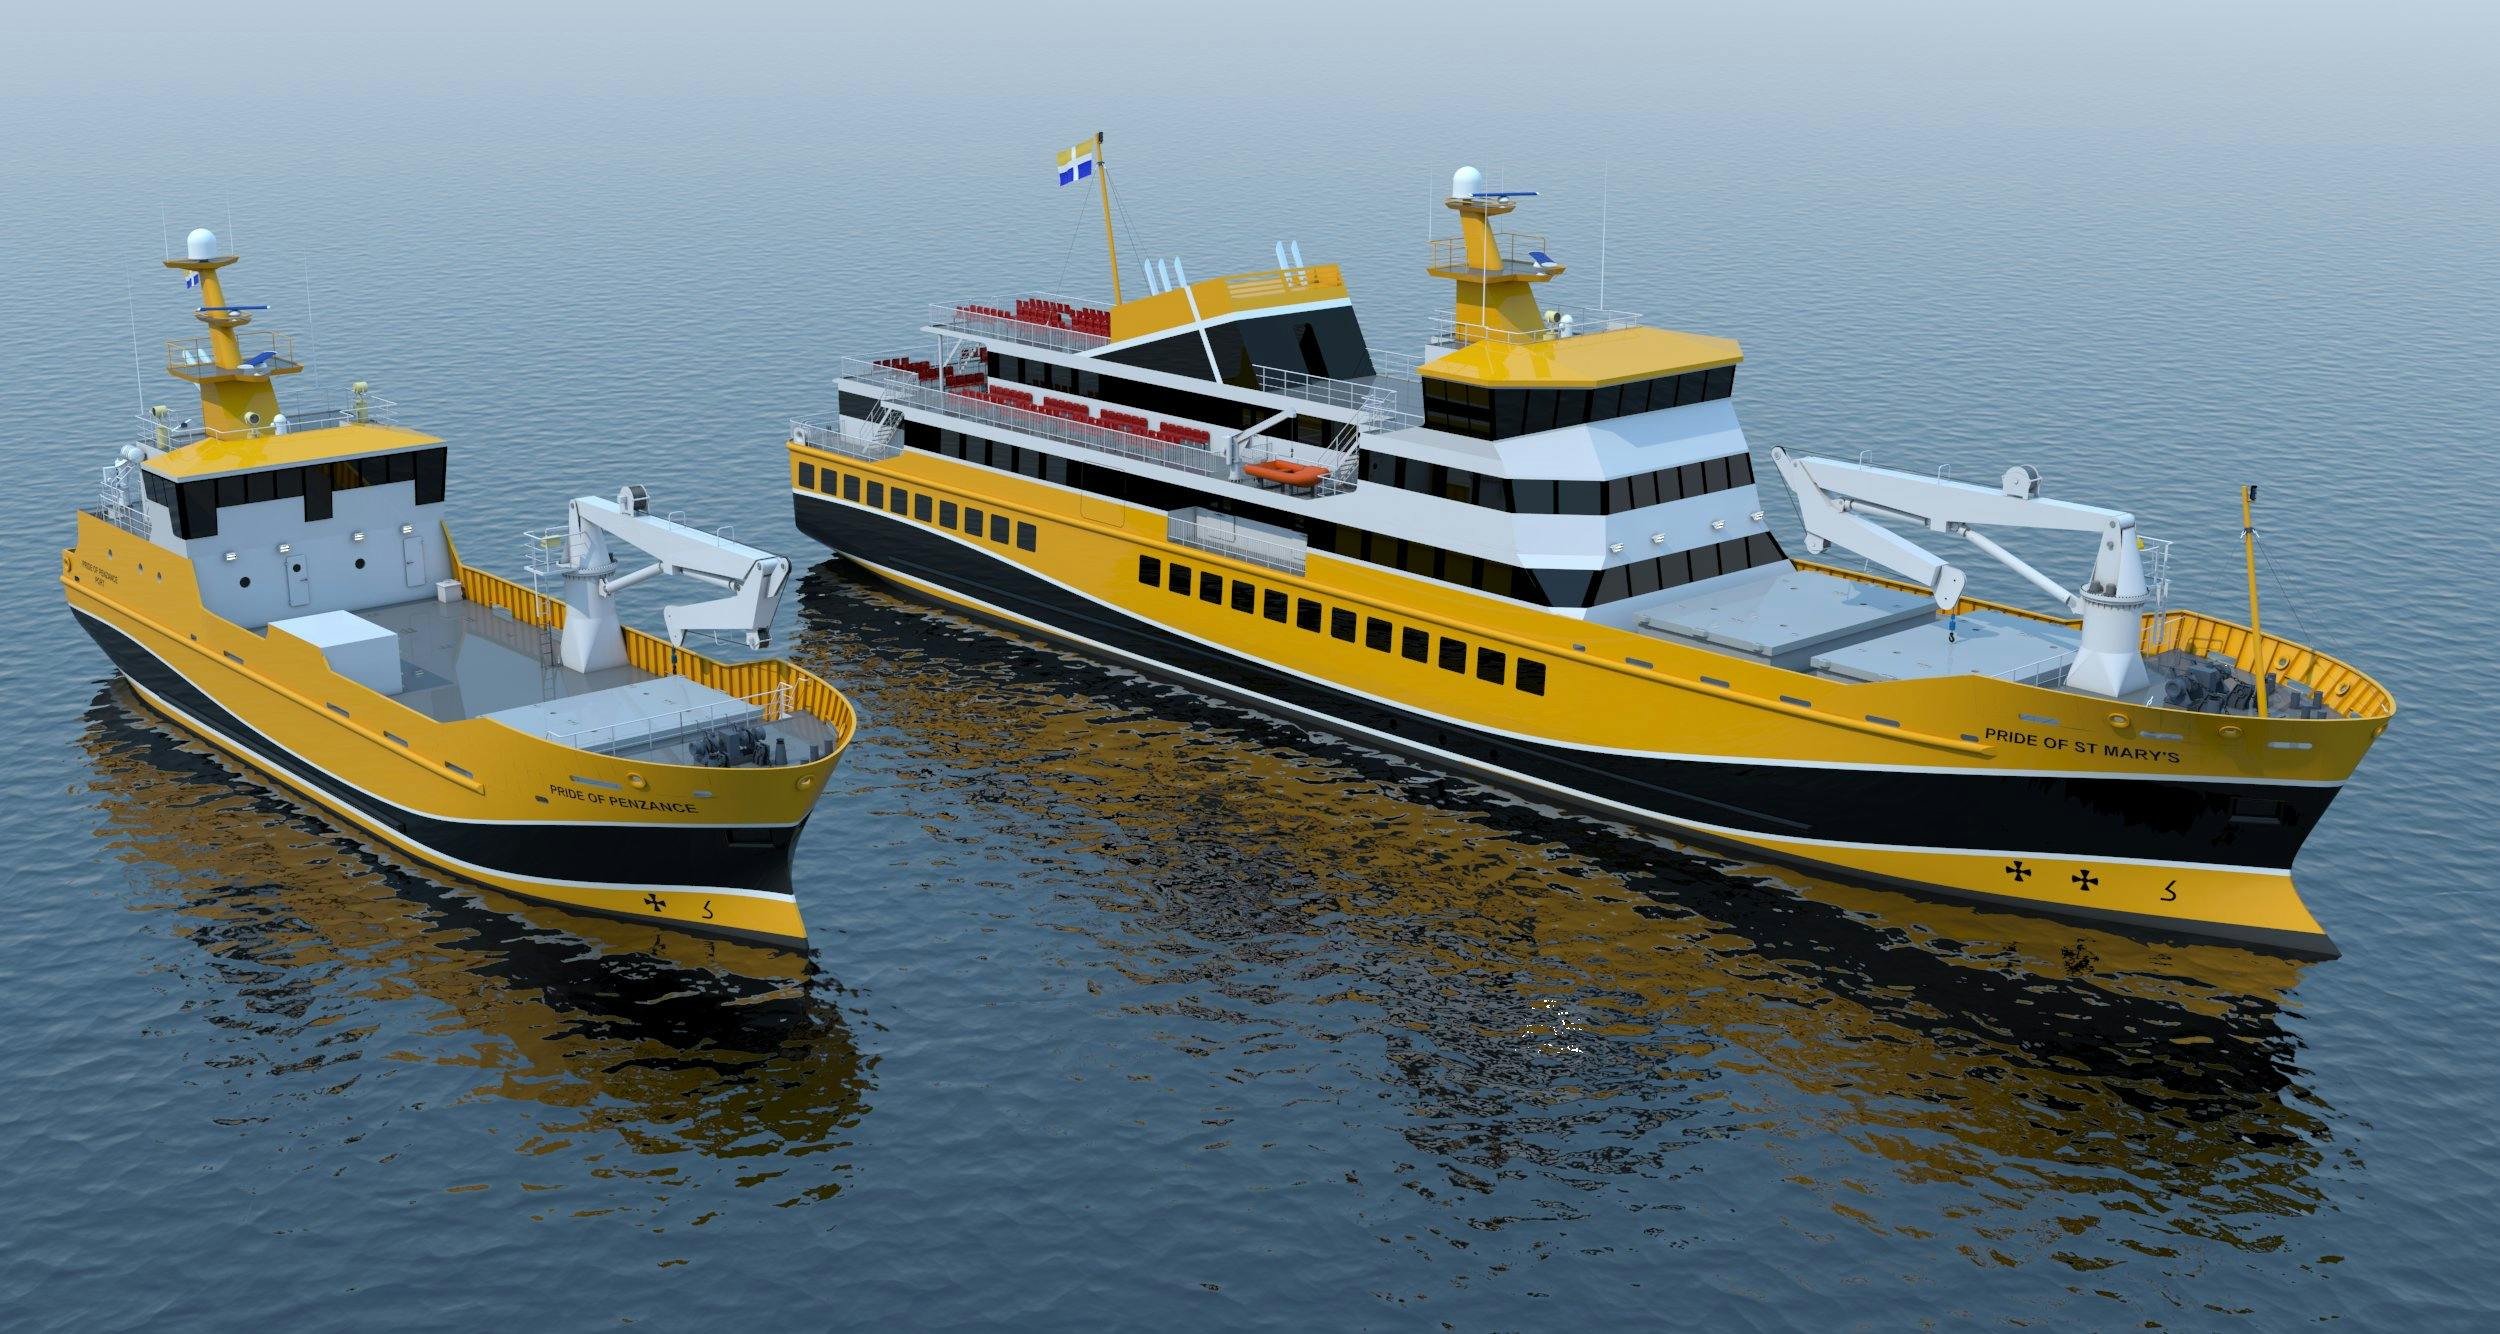 Harland & Wolff unveils plan for new Isles of Scilly ferries